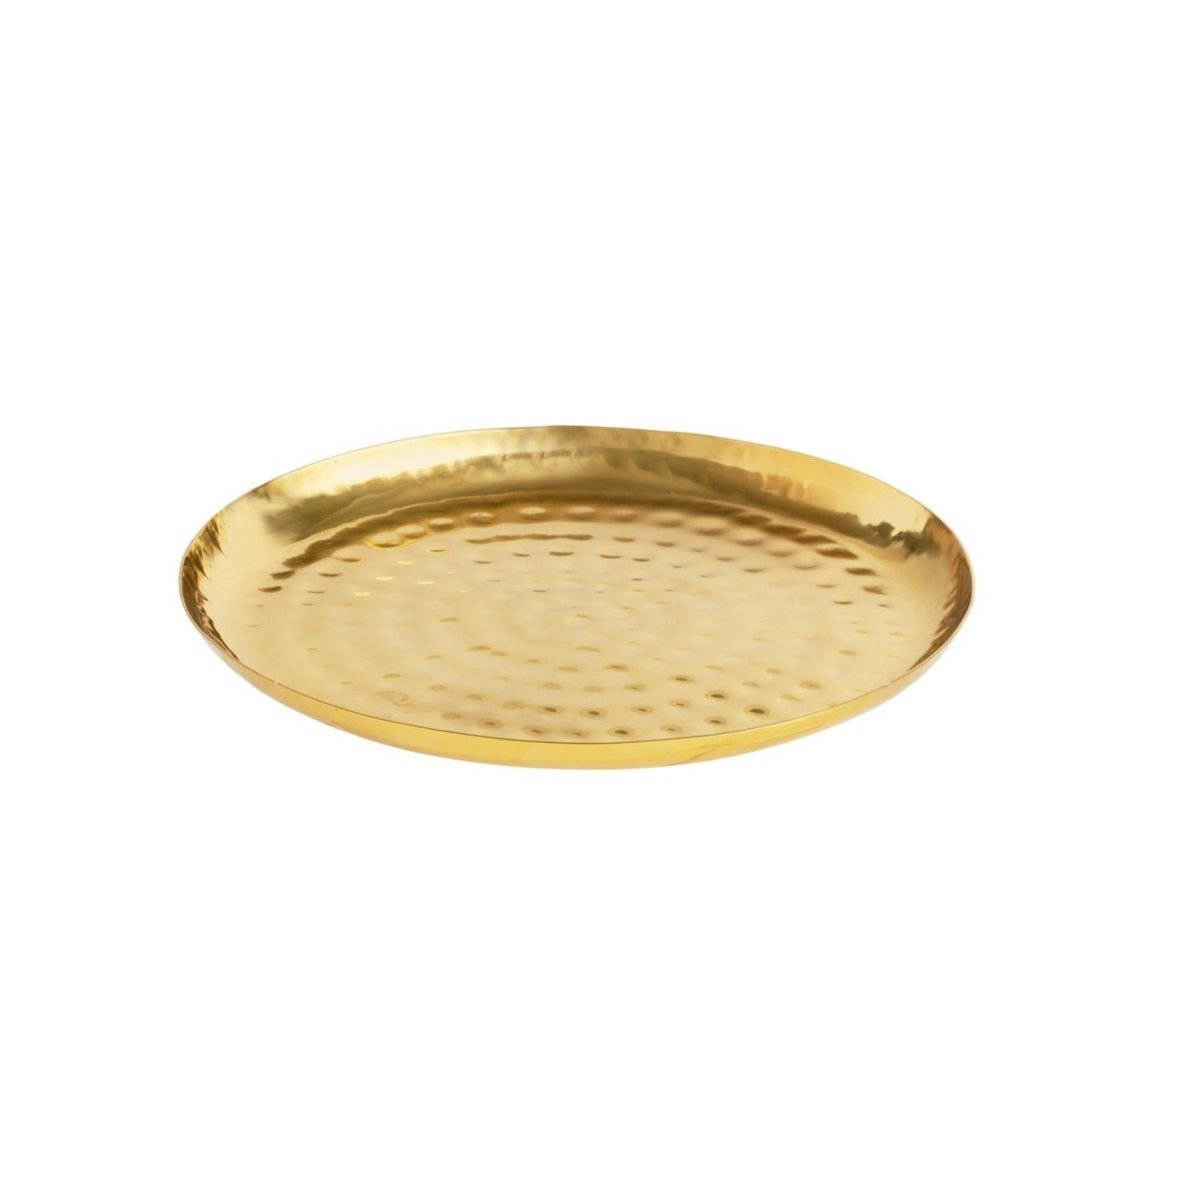 The Moroccan Room Brass Tray